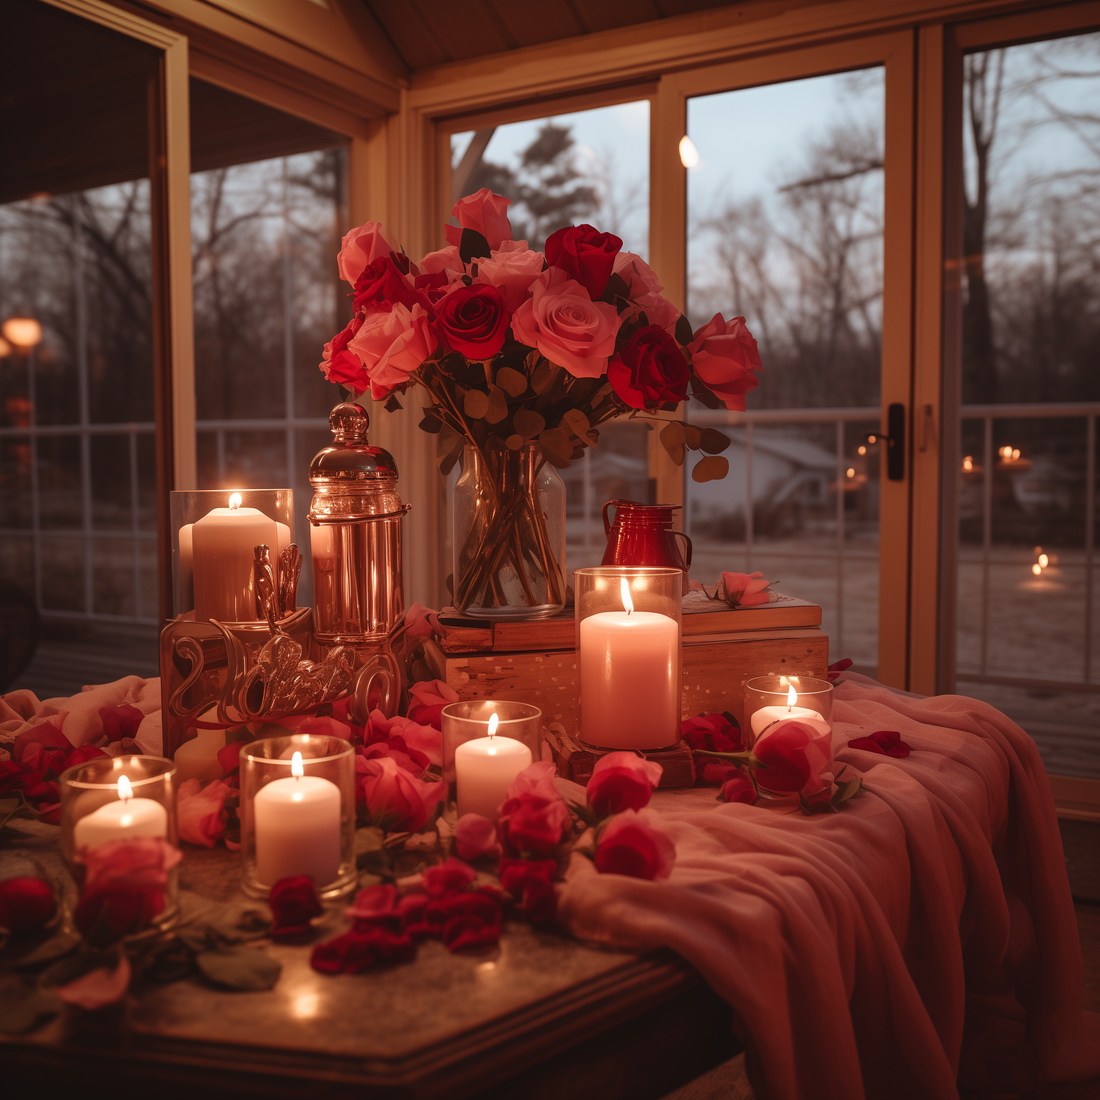 Gulbaan - Romantic Indoor Garden Ideas for a Cosy Valentine’s Day